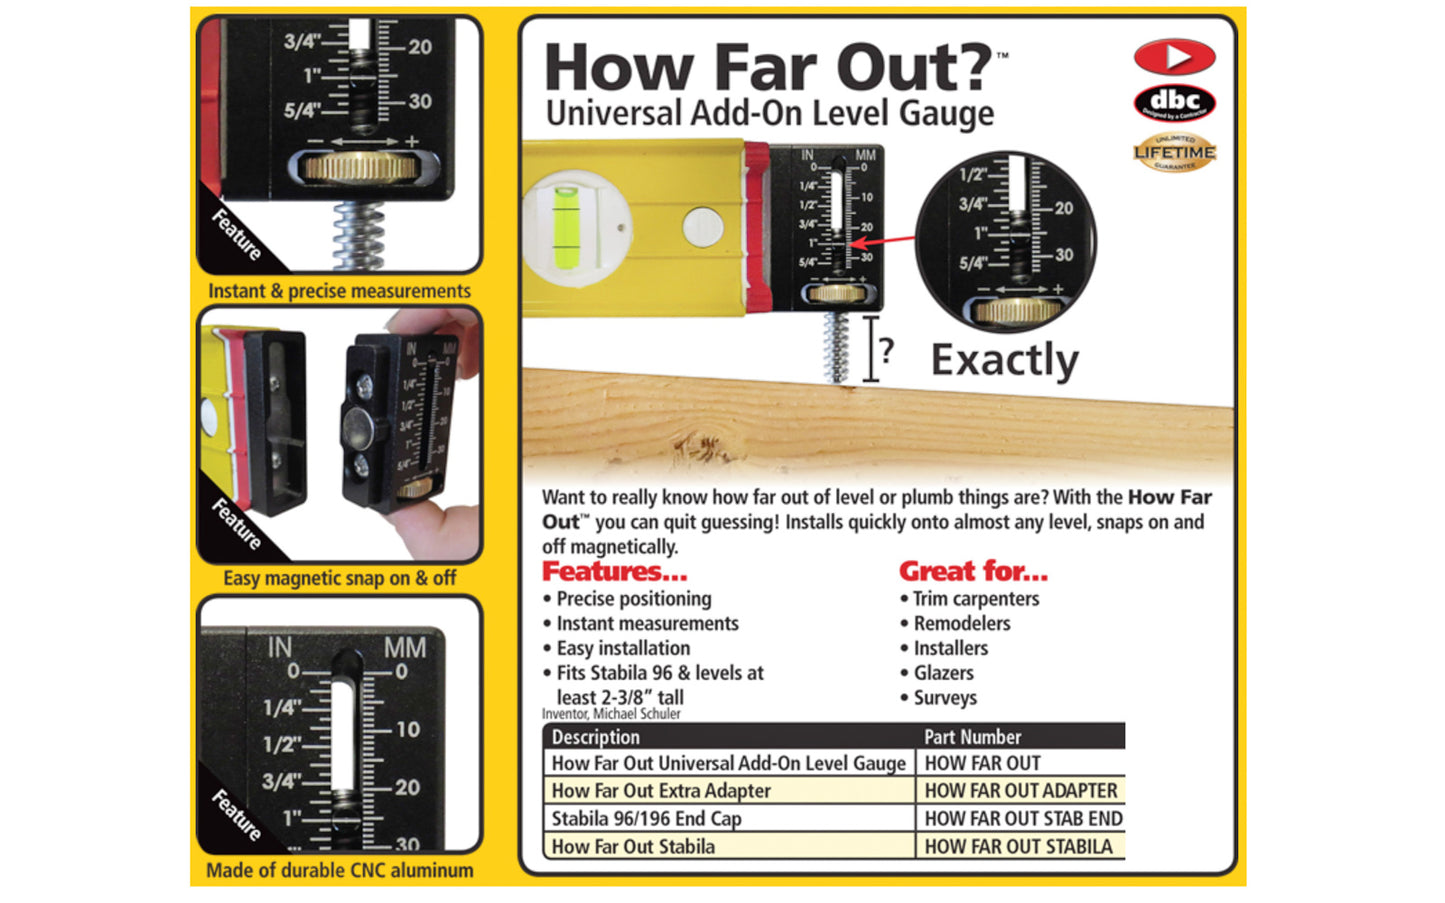 FastCap How Far Out? Universal Add-On Level Gauge Adapter - Fits Stabila 96 / 196 type levels & levels at least 2-3/8" tall